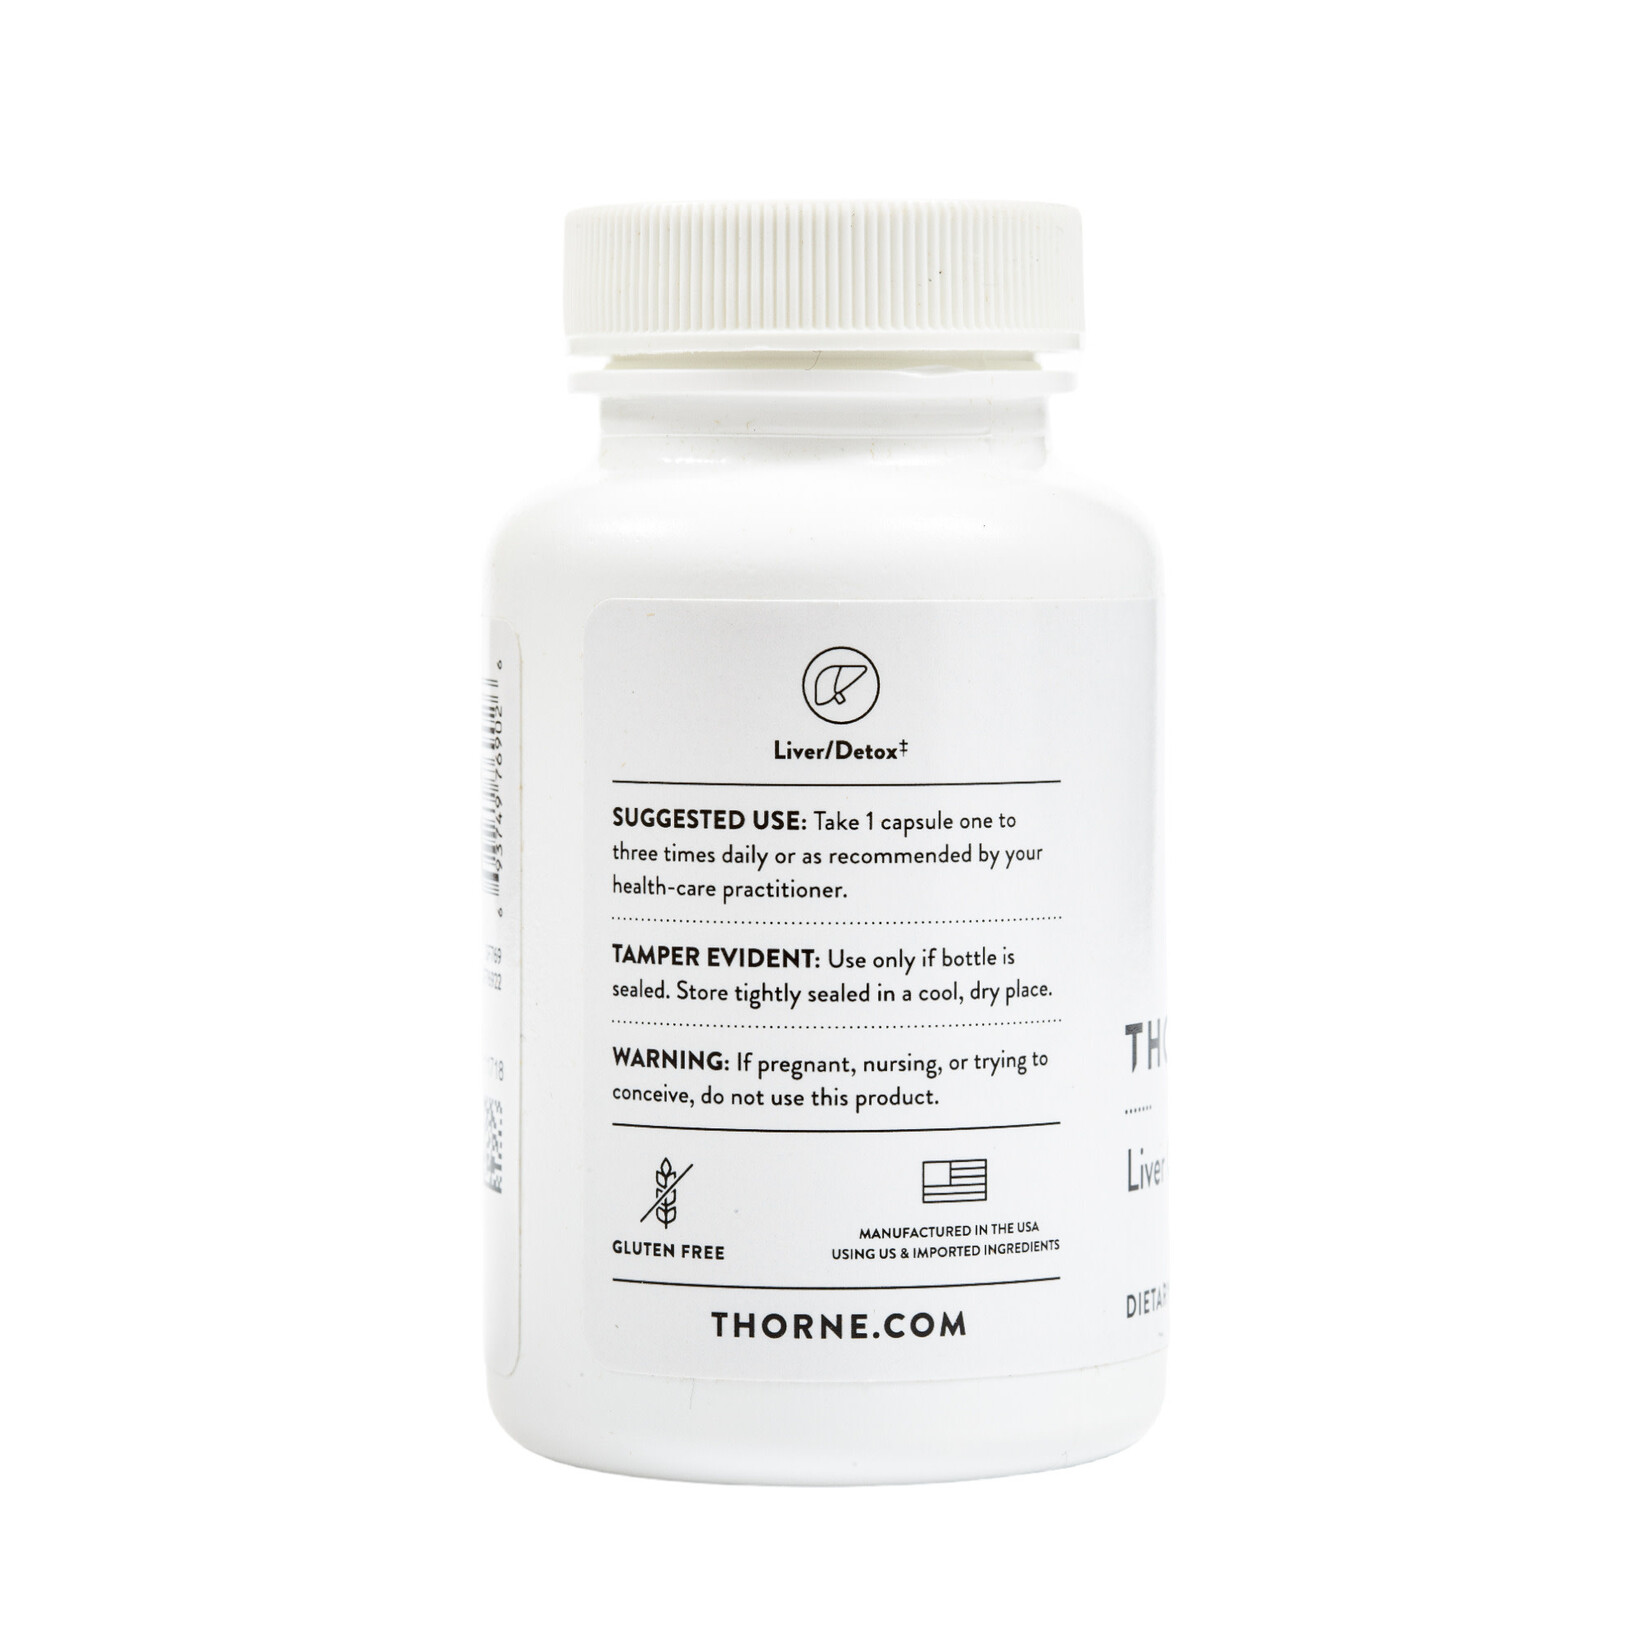 Thorne Research Liver Cleanse 60c Thorne